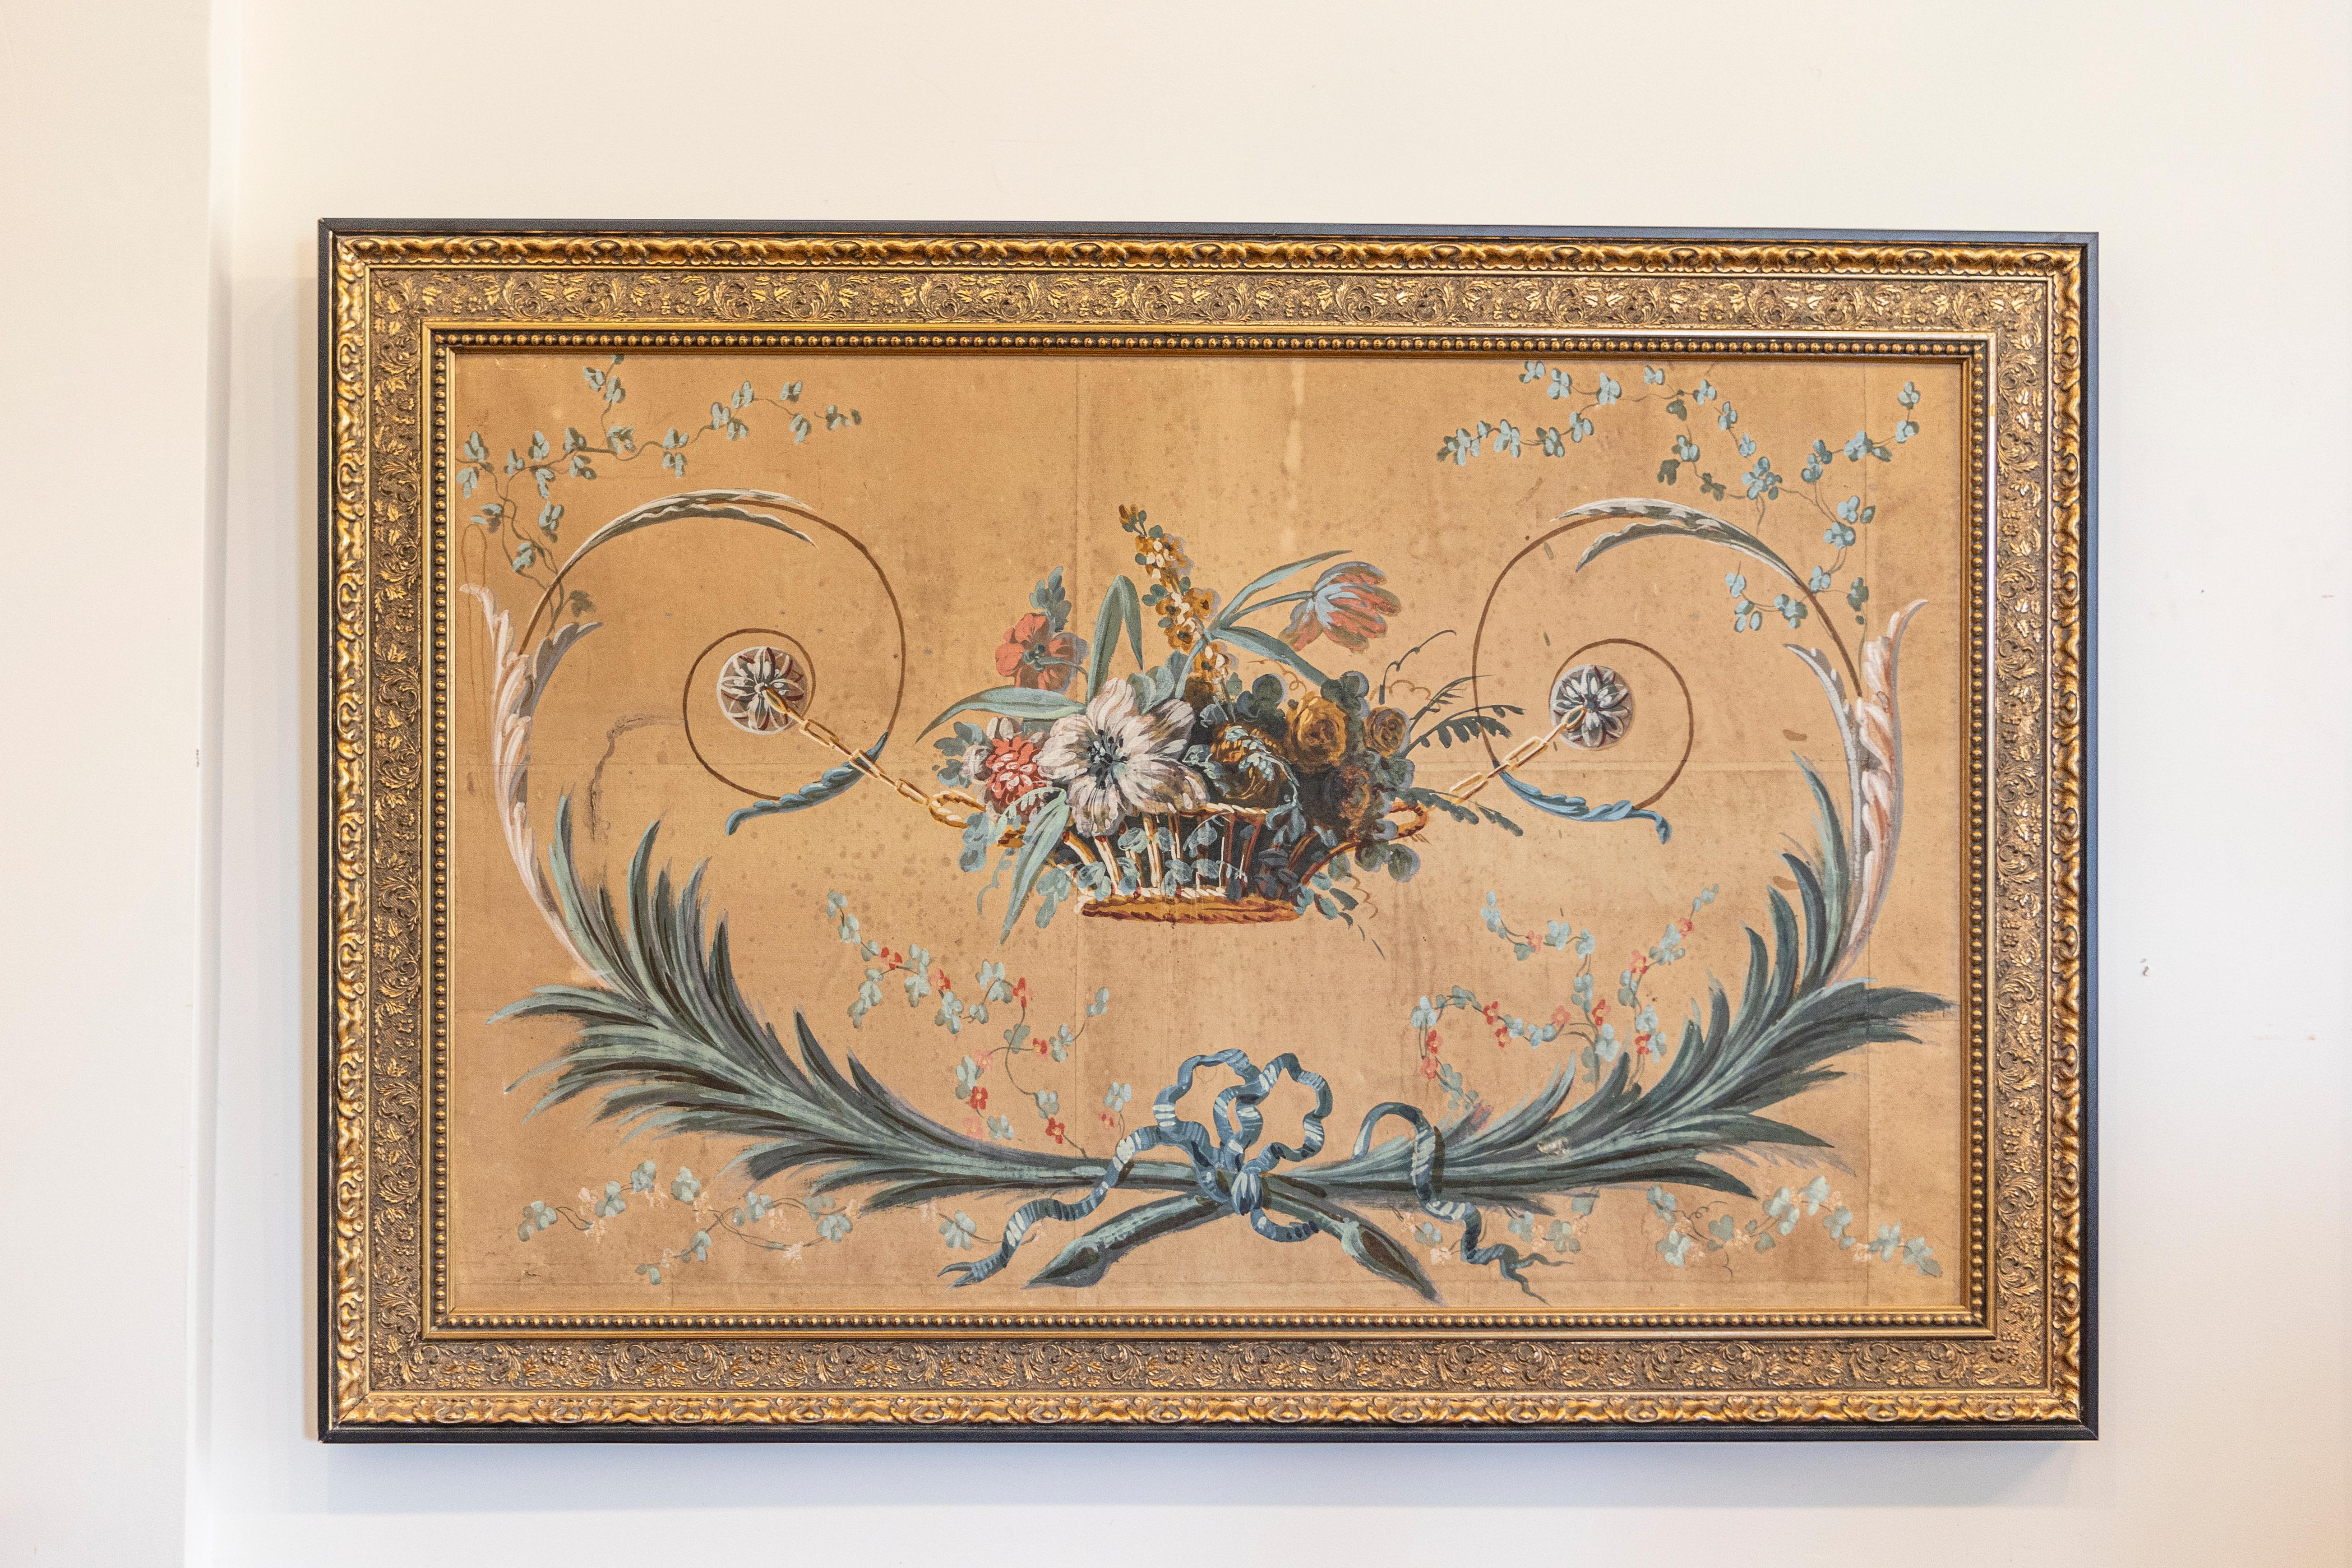 A French Directoire period framed painted panel from the late 18th century, with floral motifs. Born in France during the later years of the 18th century, this exquisite decorative panel features a lovely bouquet of flowers, displayed in a humble